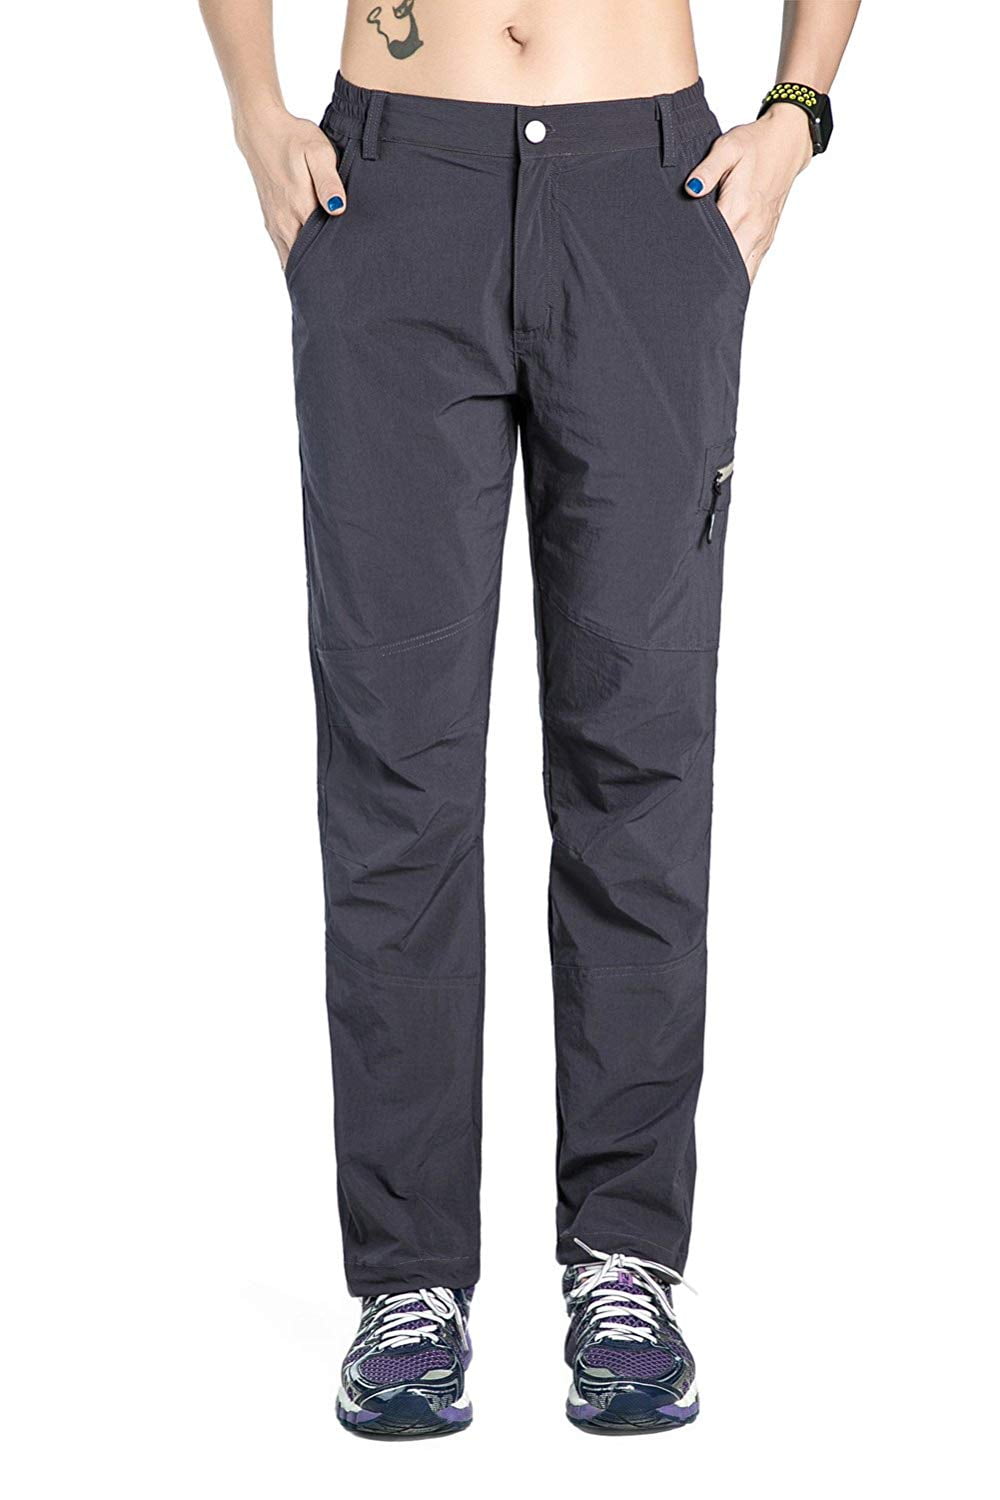 Buy Navy Blue Track Pants for Women by Incite Online | Ajio.com